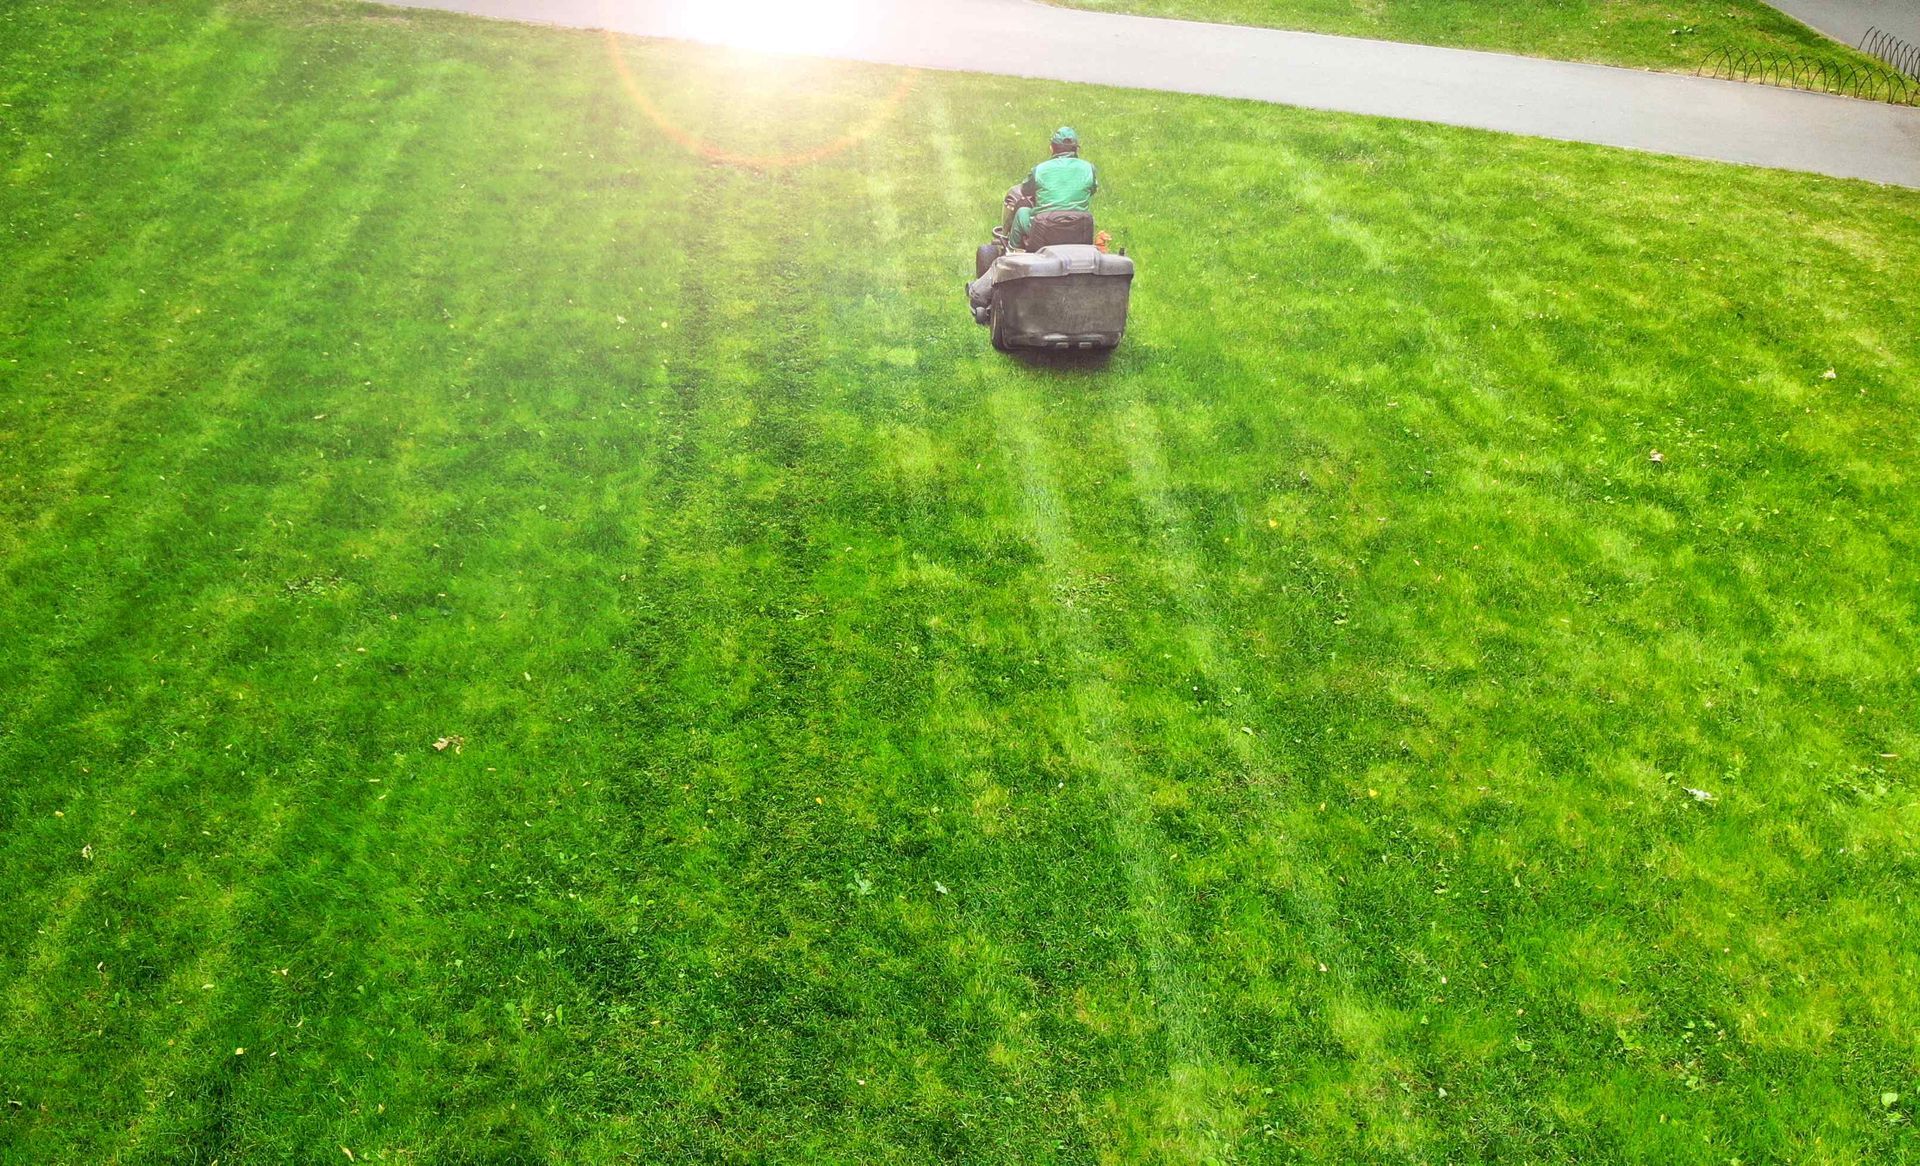 Mowing grass with ride on mower